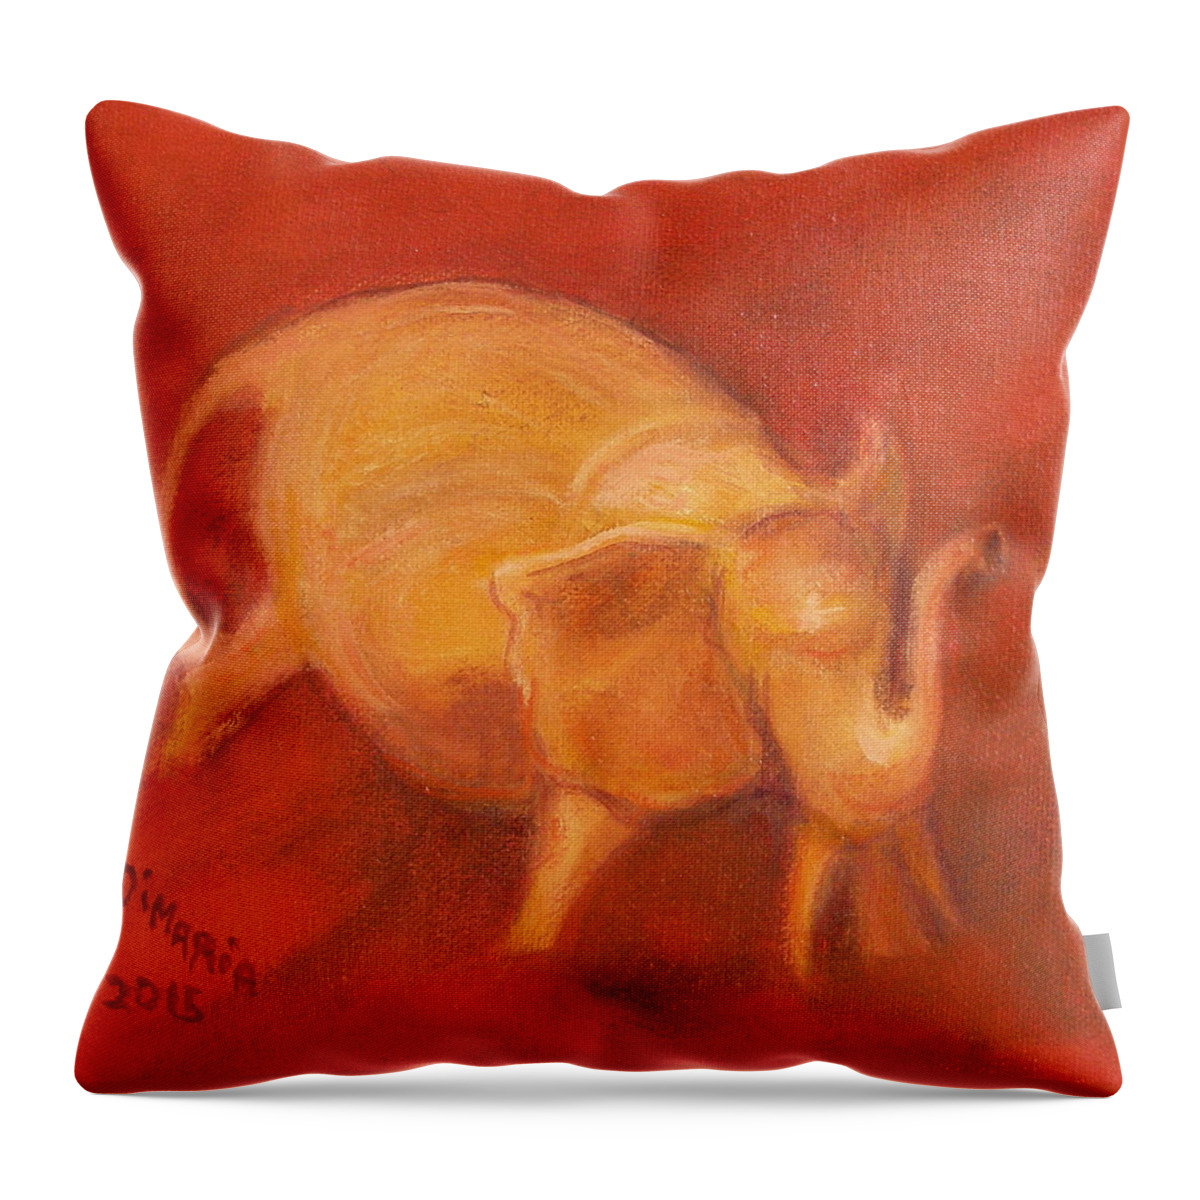 Realism Throw Pillow featuring the painting One Elephant by Donelli DiMaria